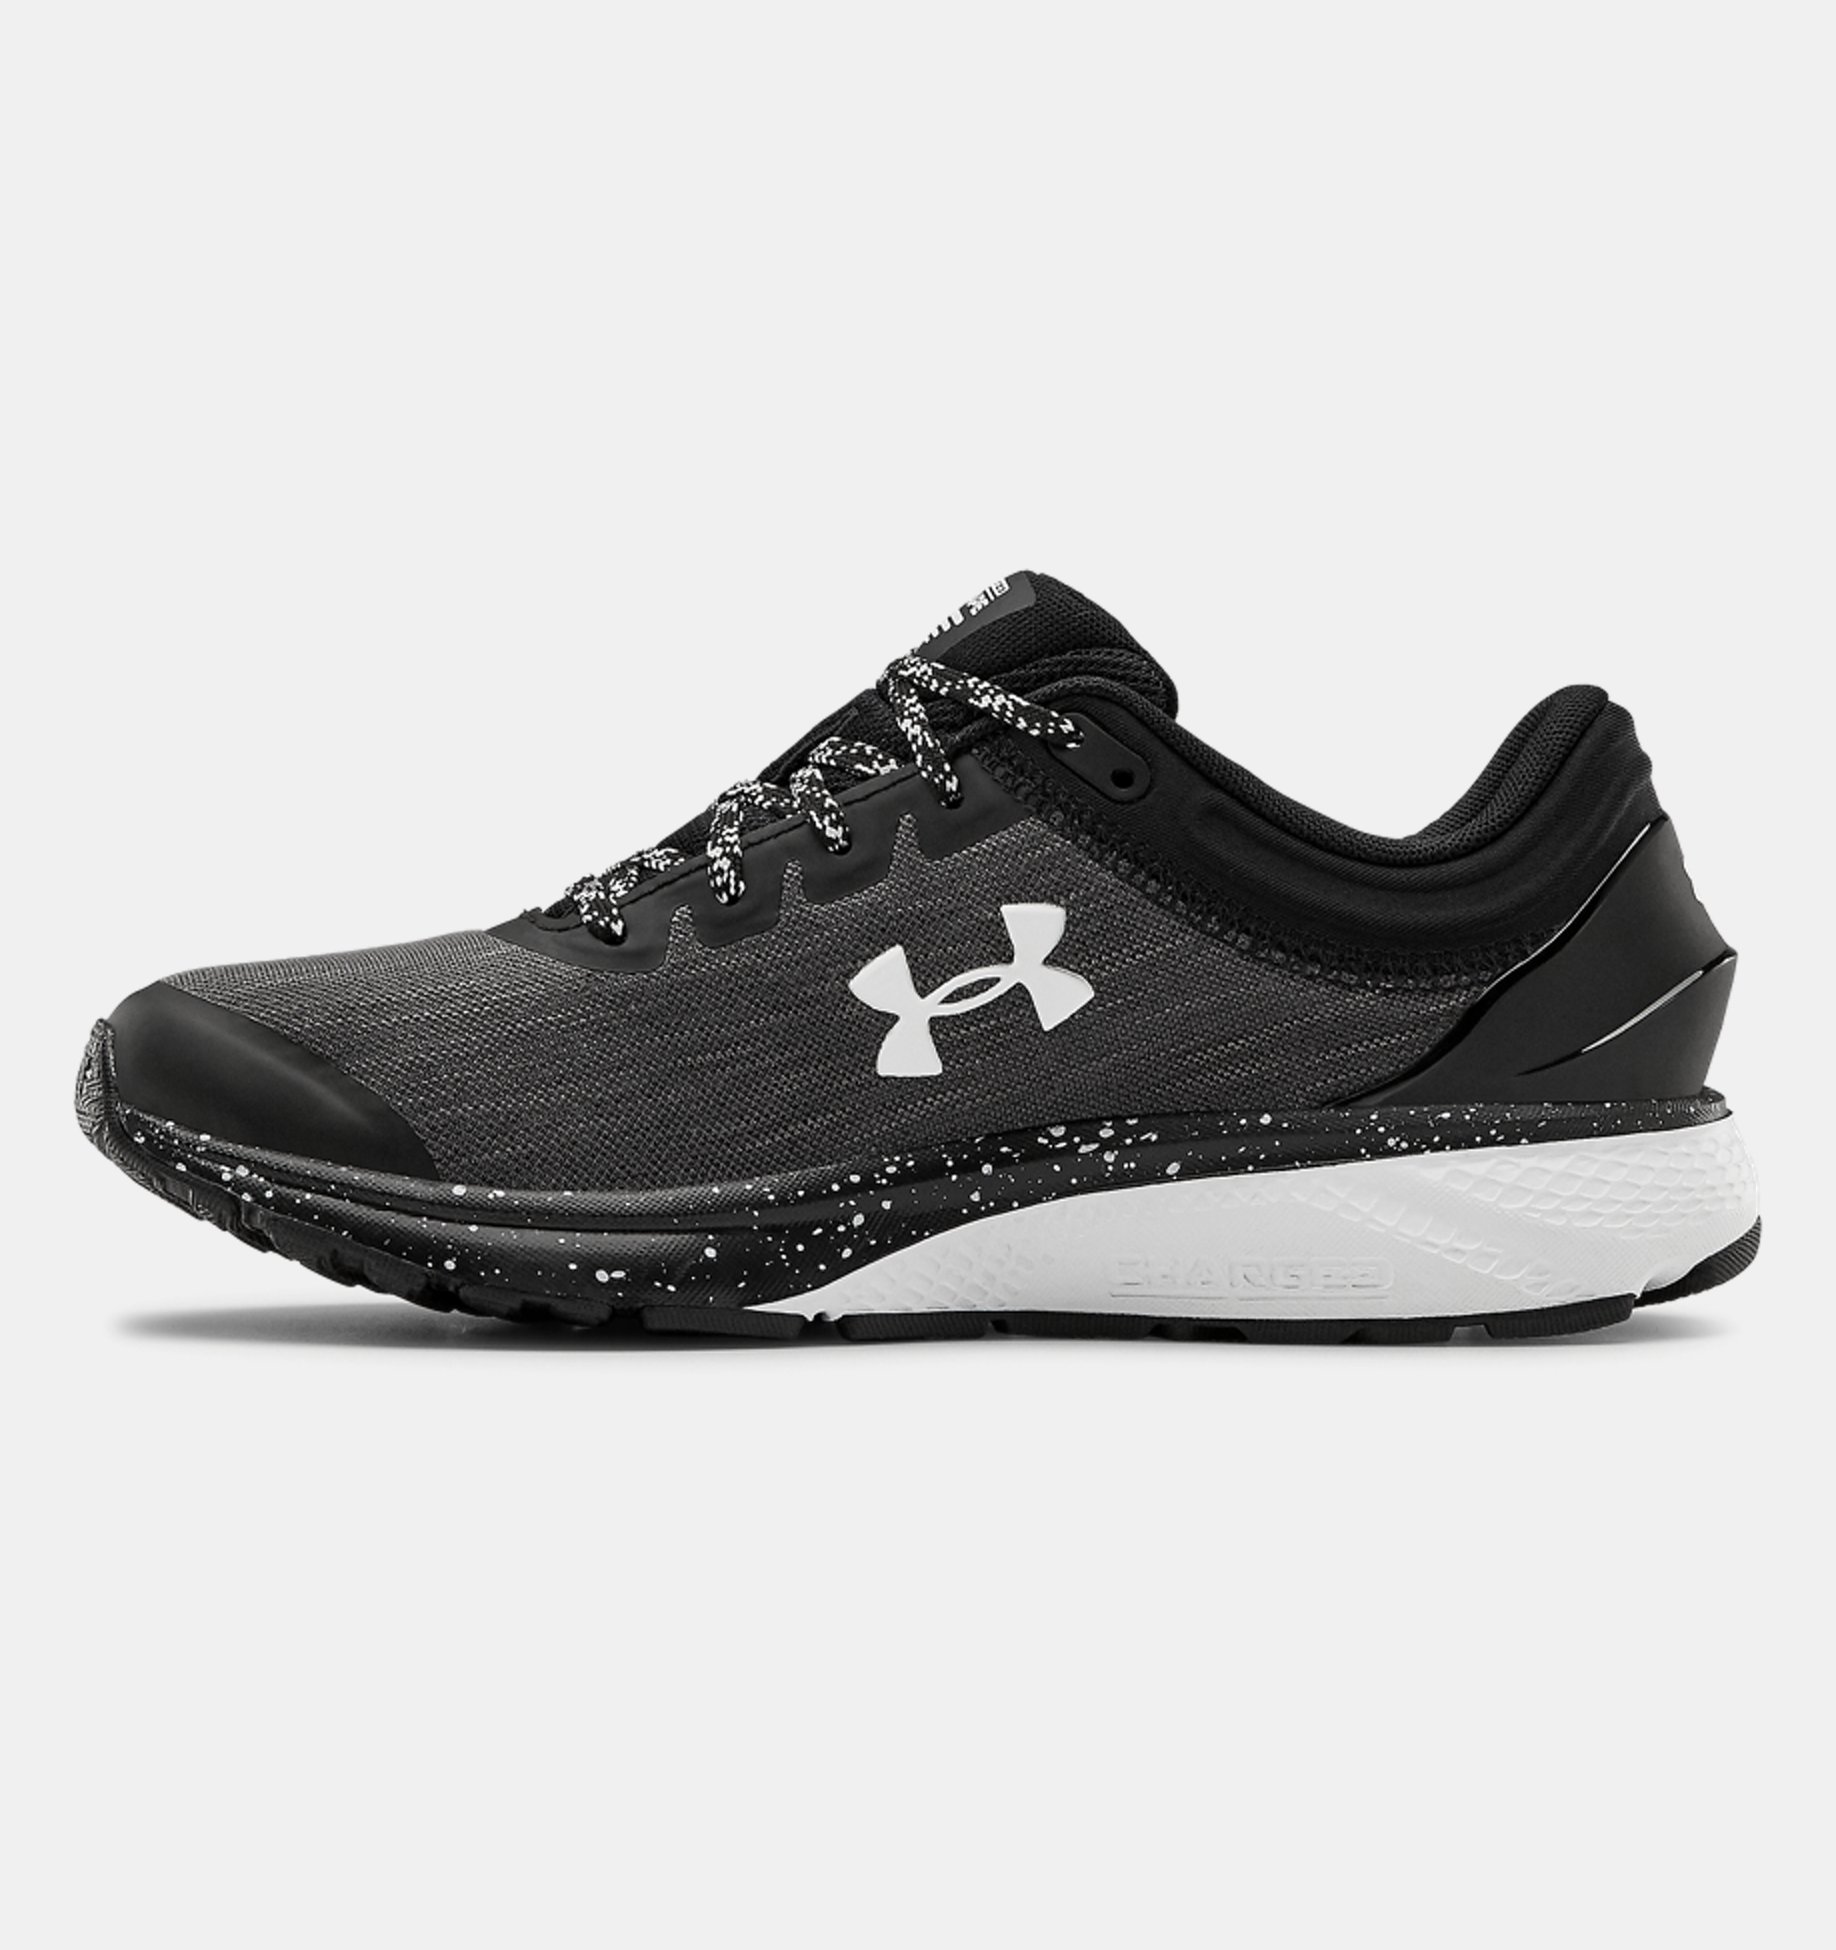 UNDER ARMOUR CHARGED ESCAPE 2 TRAINERS SHOES SNEAKERS RUNNING FITNESS GYM NEW 